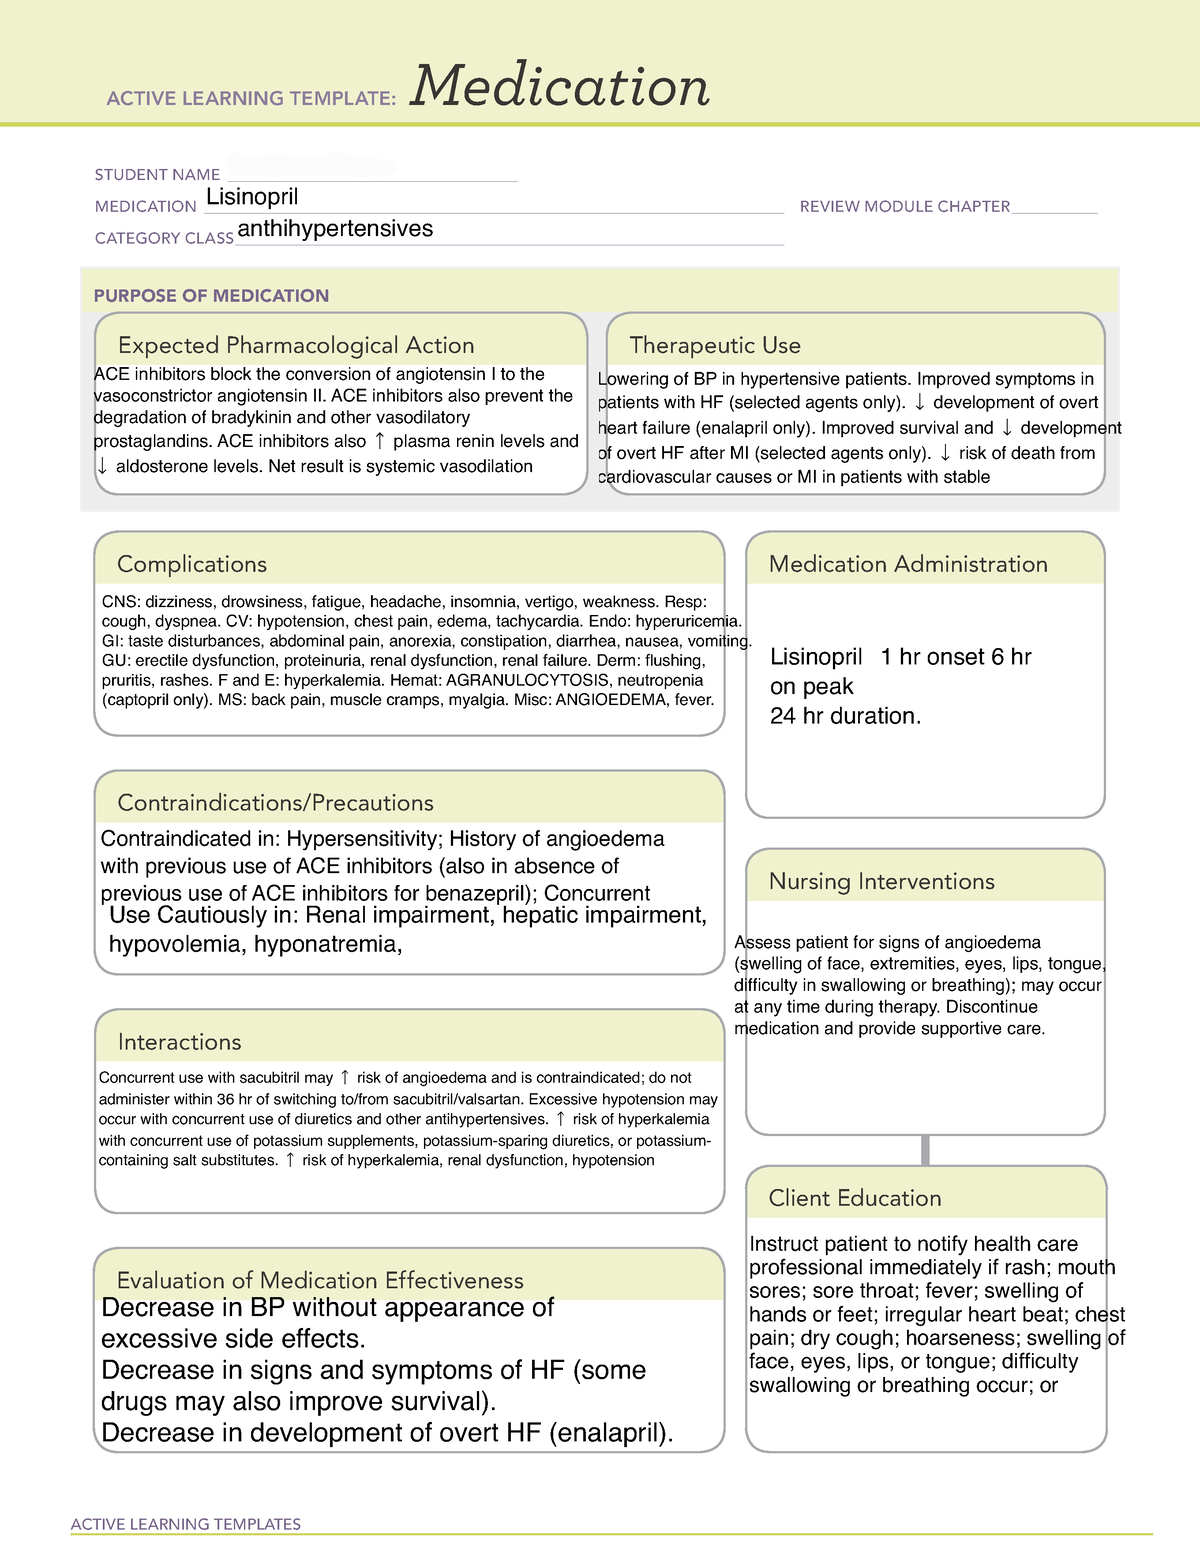 Lisinopril med template ACTIVE LEARNING TEMPLATES Medication STUDENT